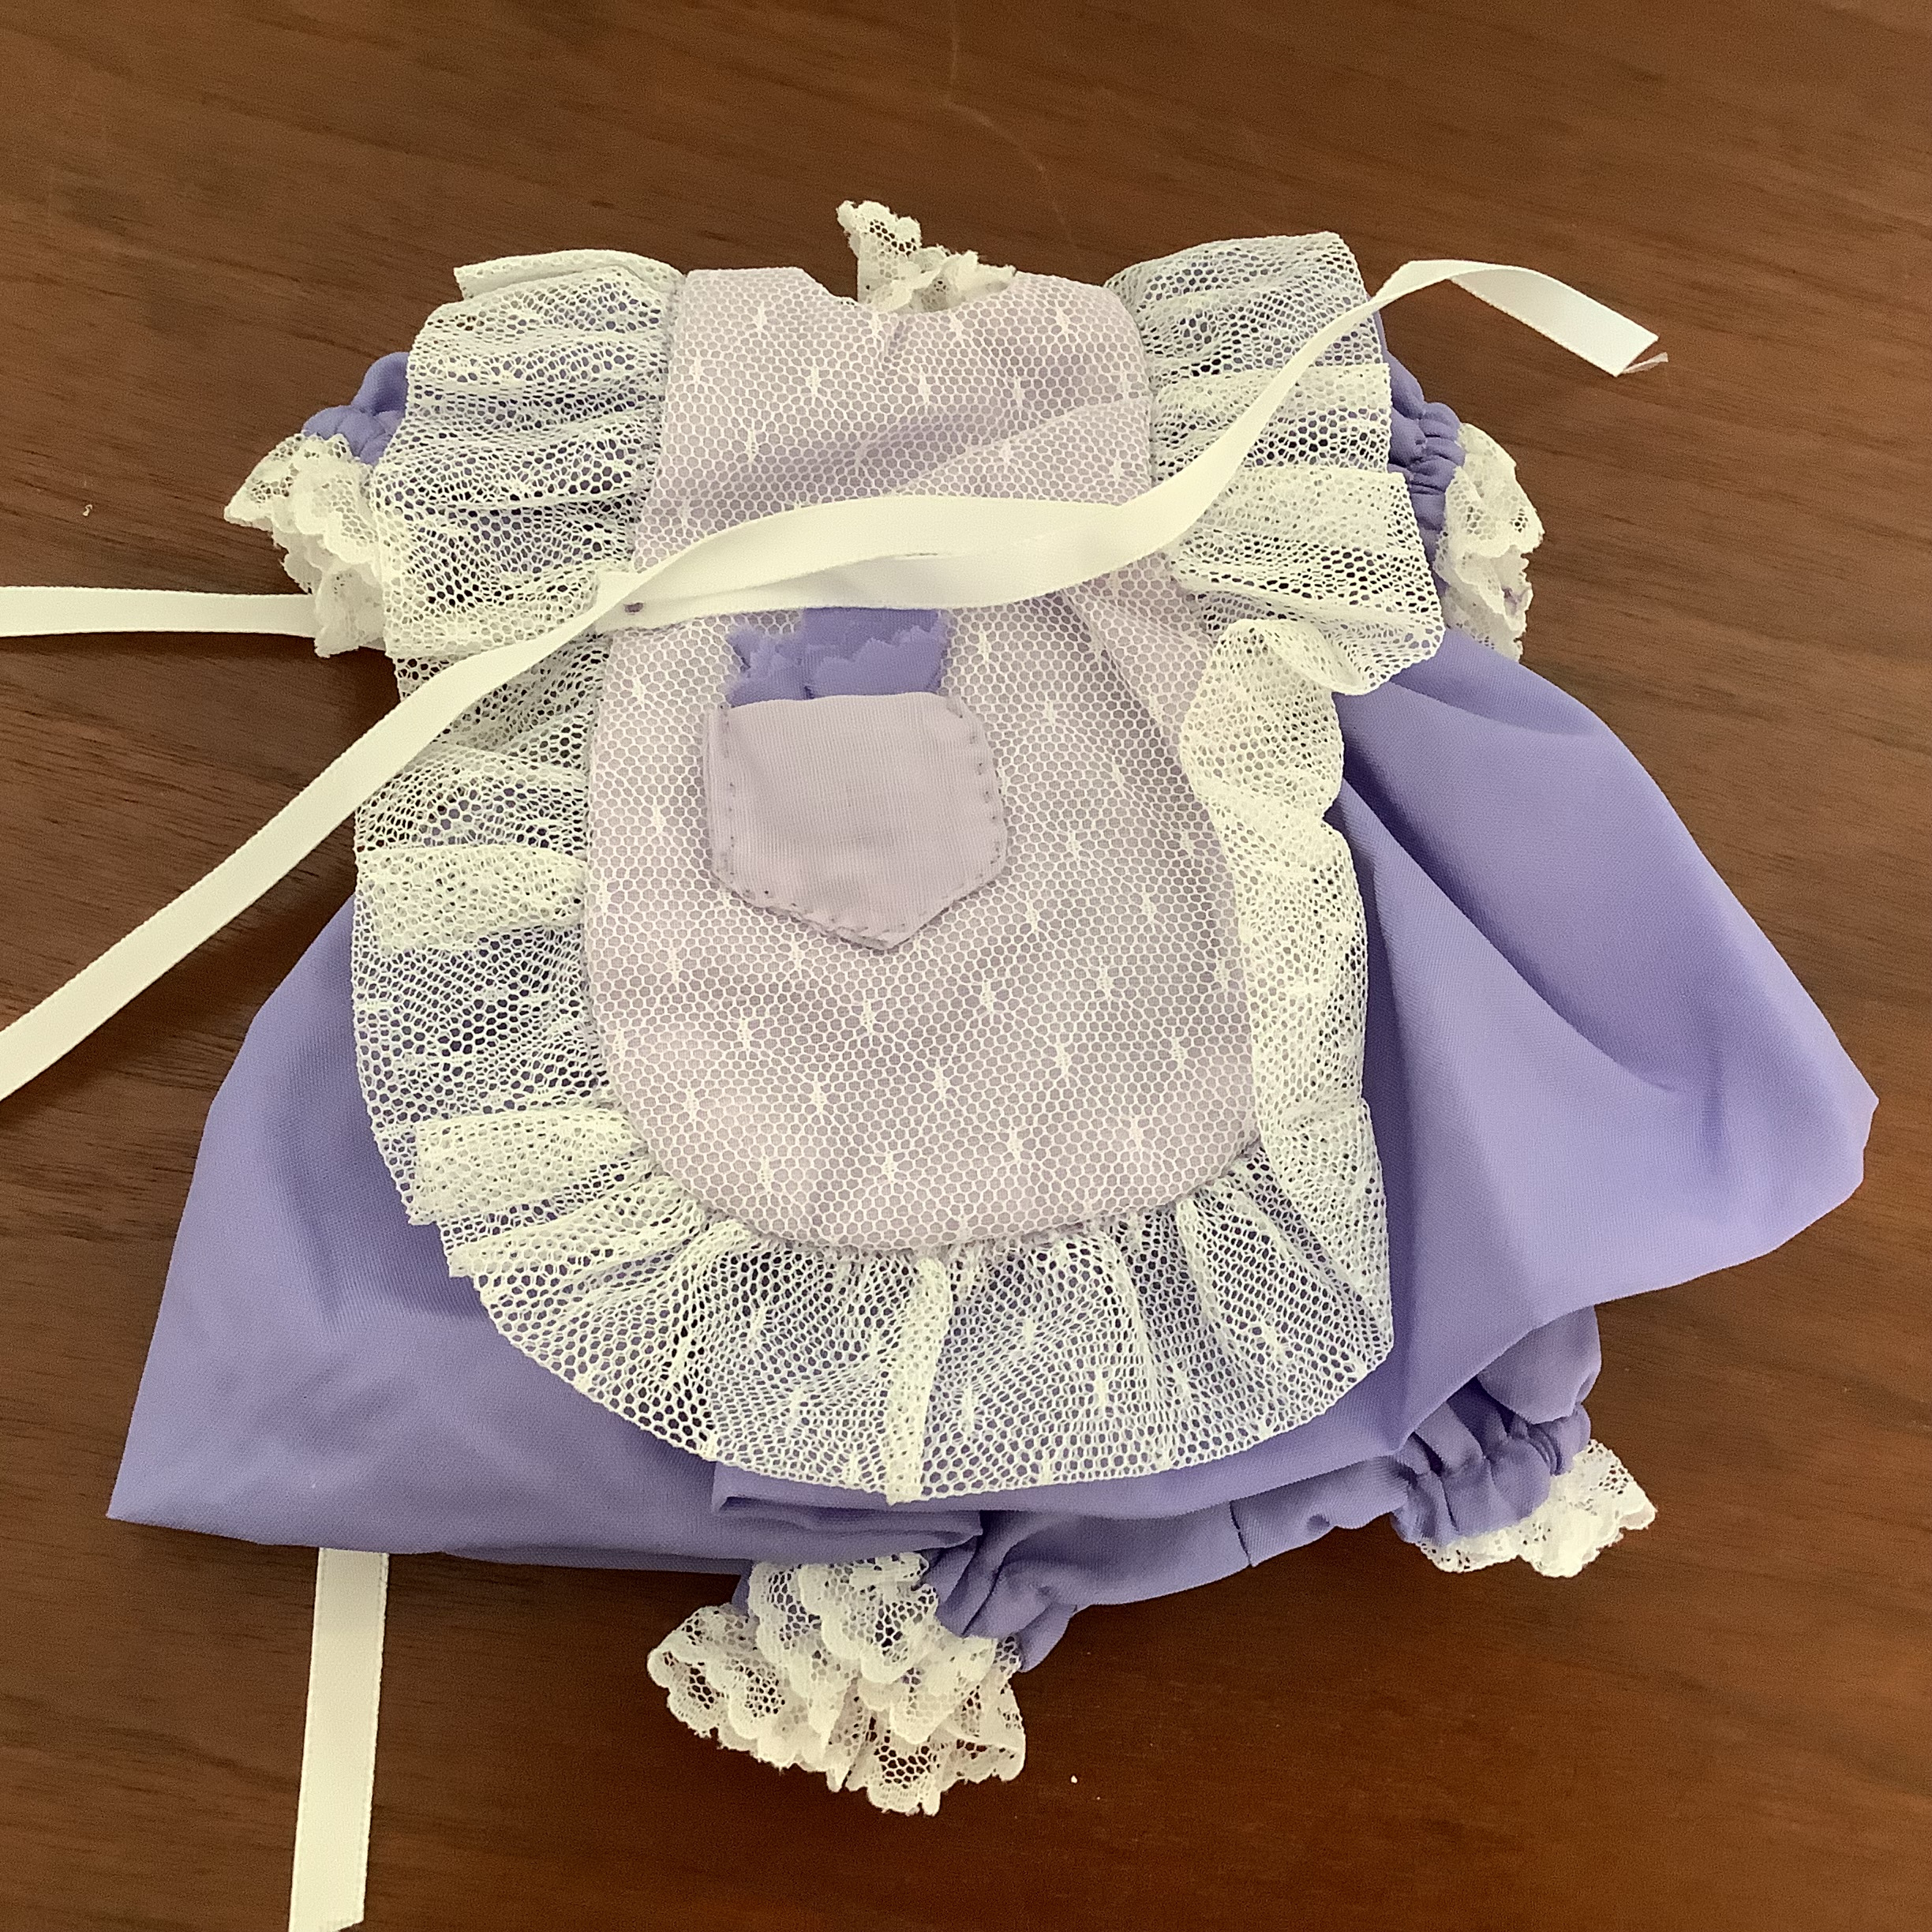 Purple dress with gathered skirt and matching bloomers, partially obscured by a white apron with lace edges